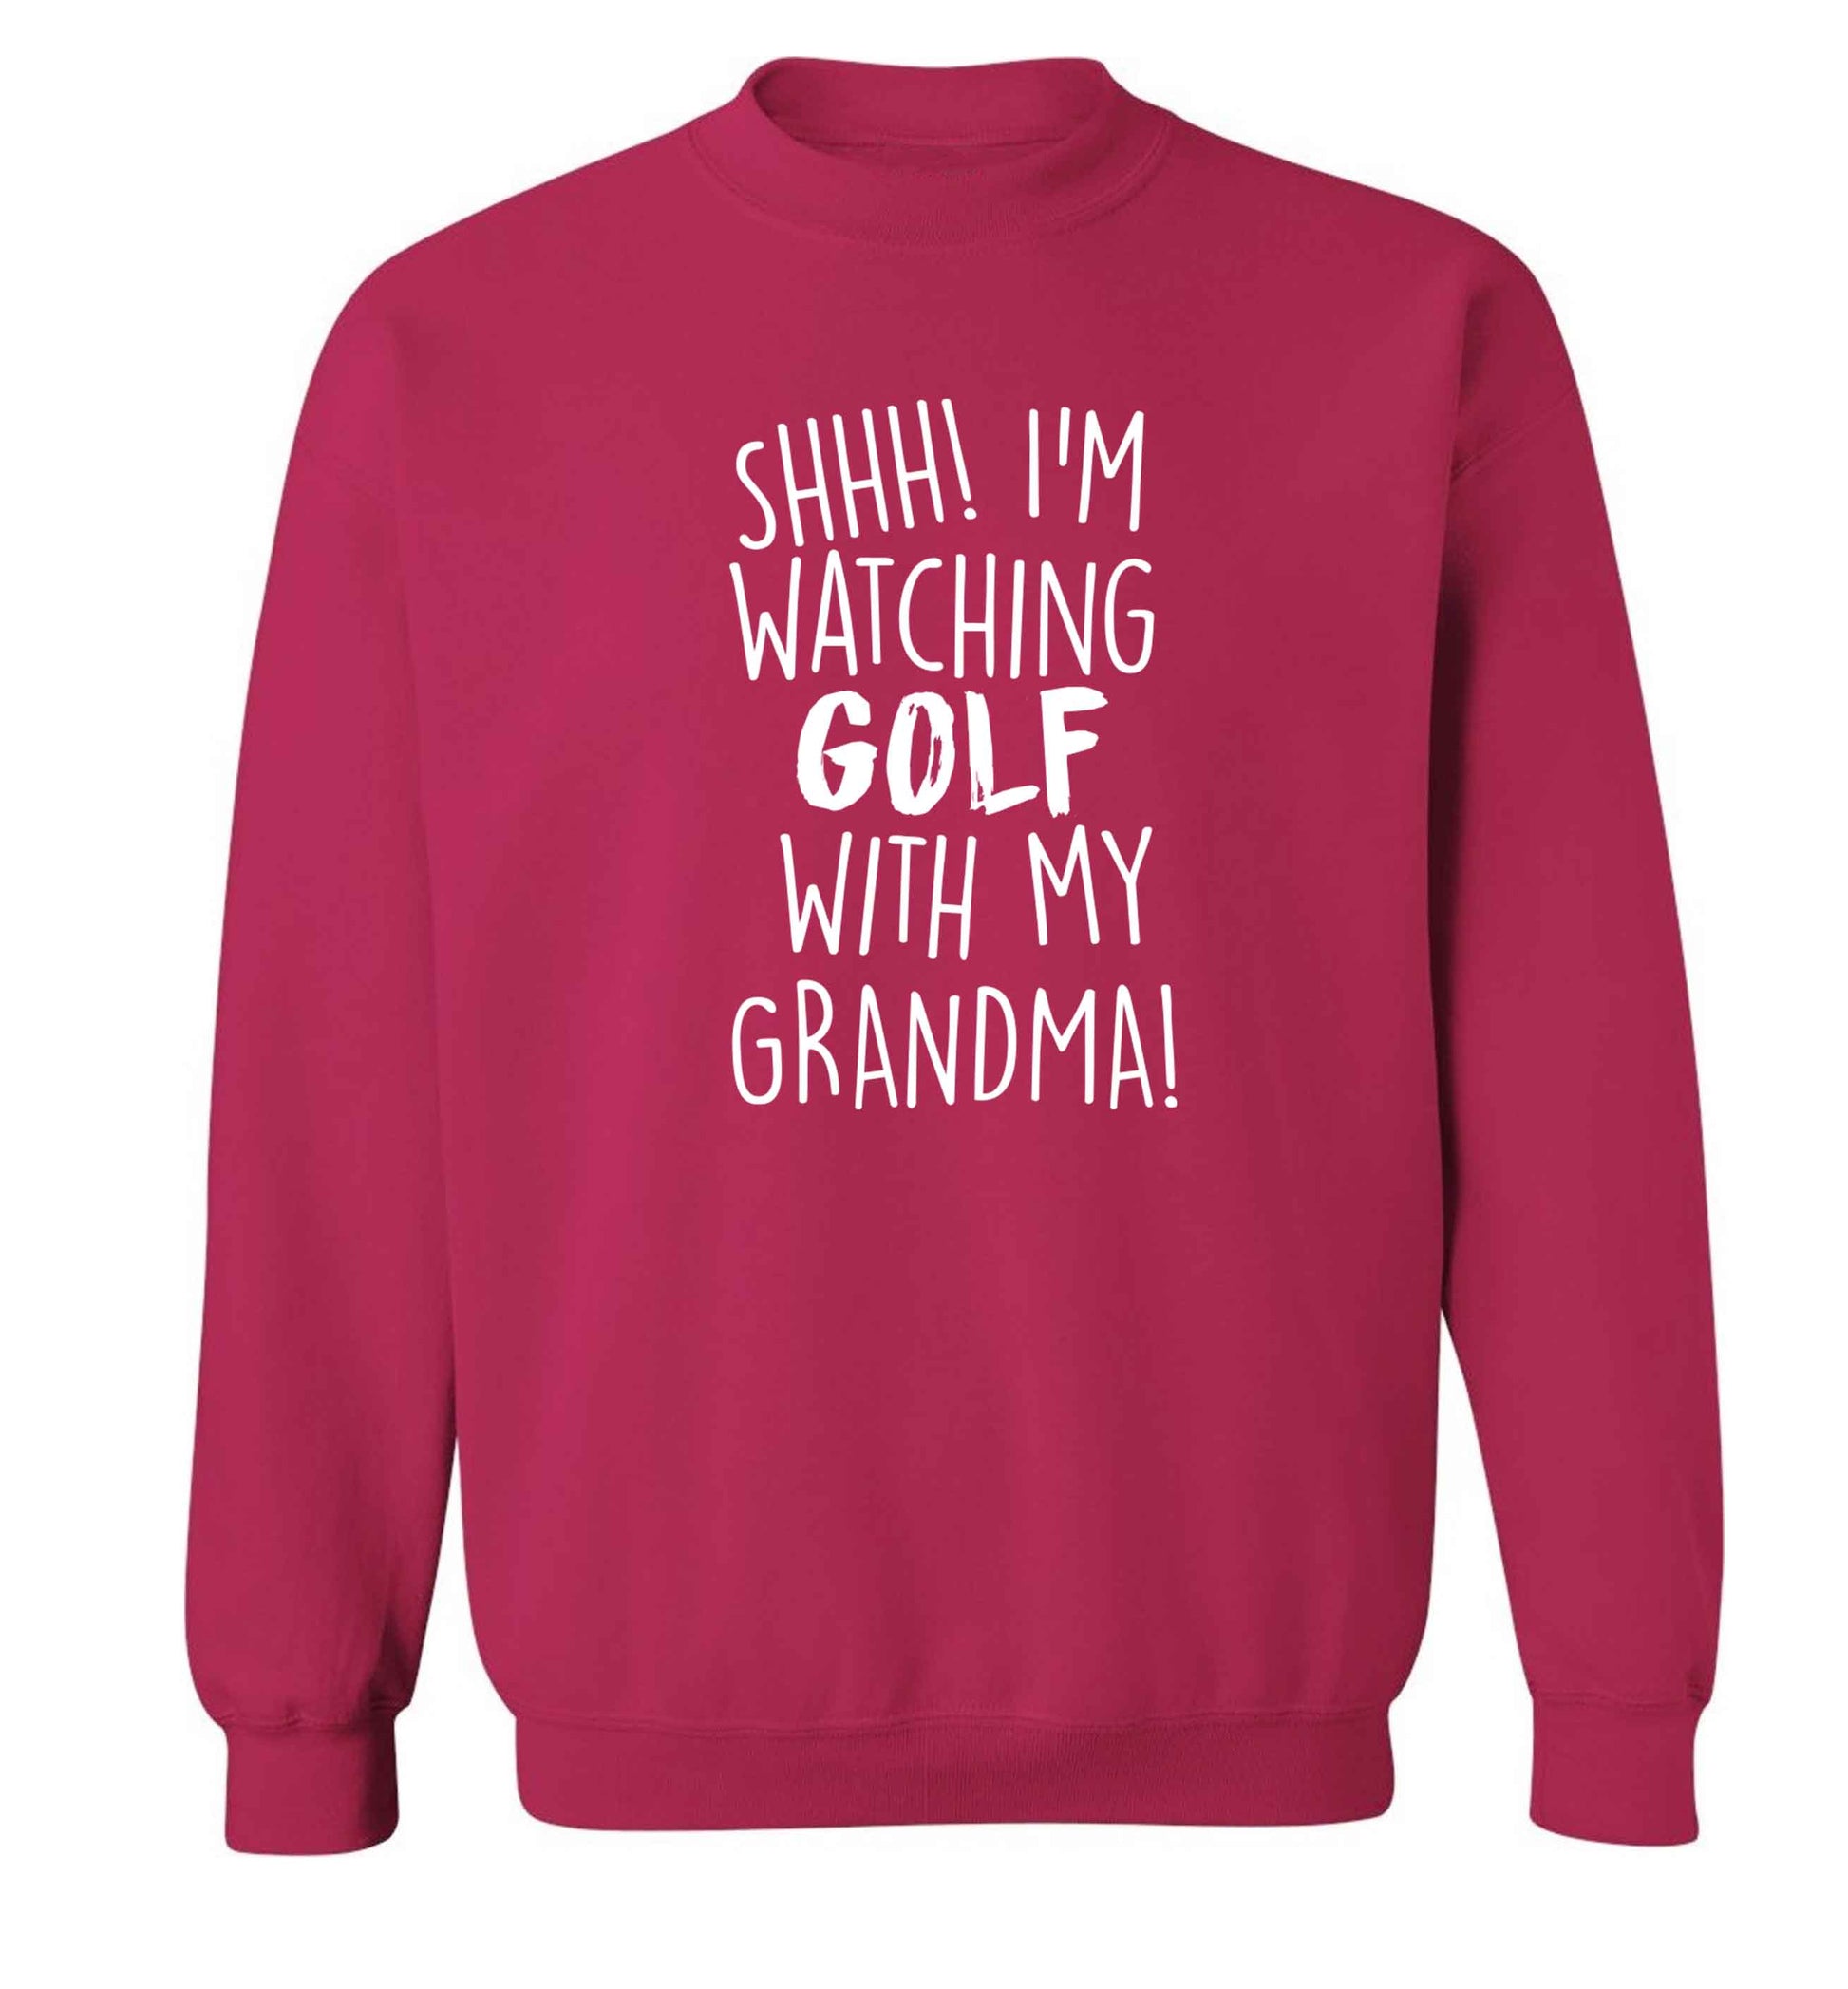 Shh I'm watching golf with my grandma Adult's unisex pink Sweater 2XL